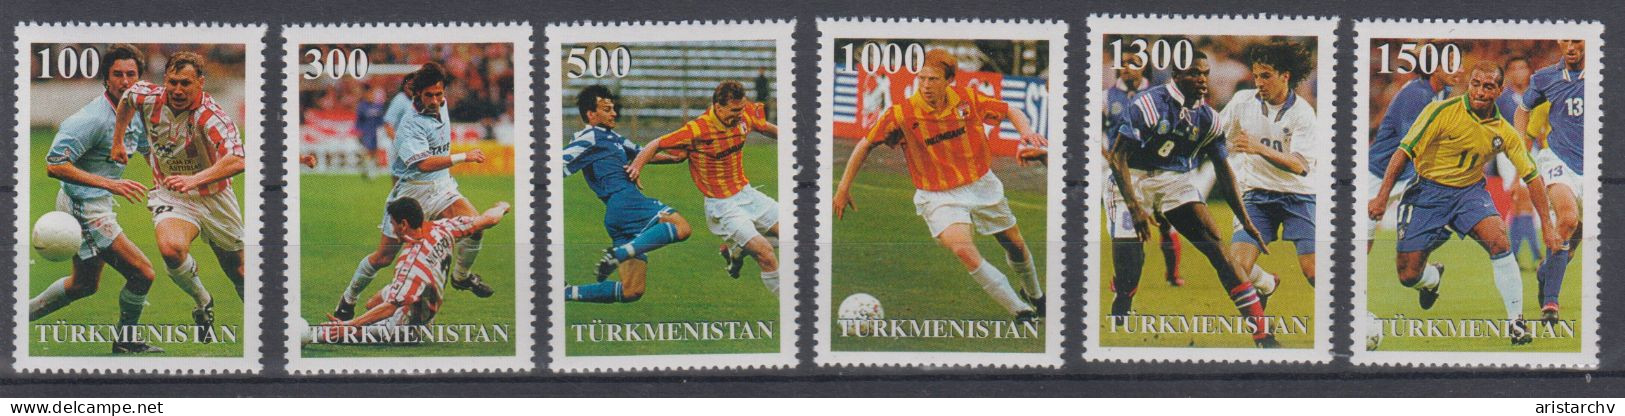 TURKMENISTAN 1998 FOOTBALL WORLD CUP 2 S/SHEETS AND 6 STAMPS - 1998 – France